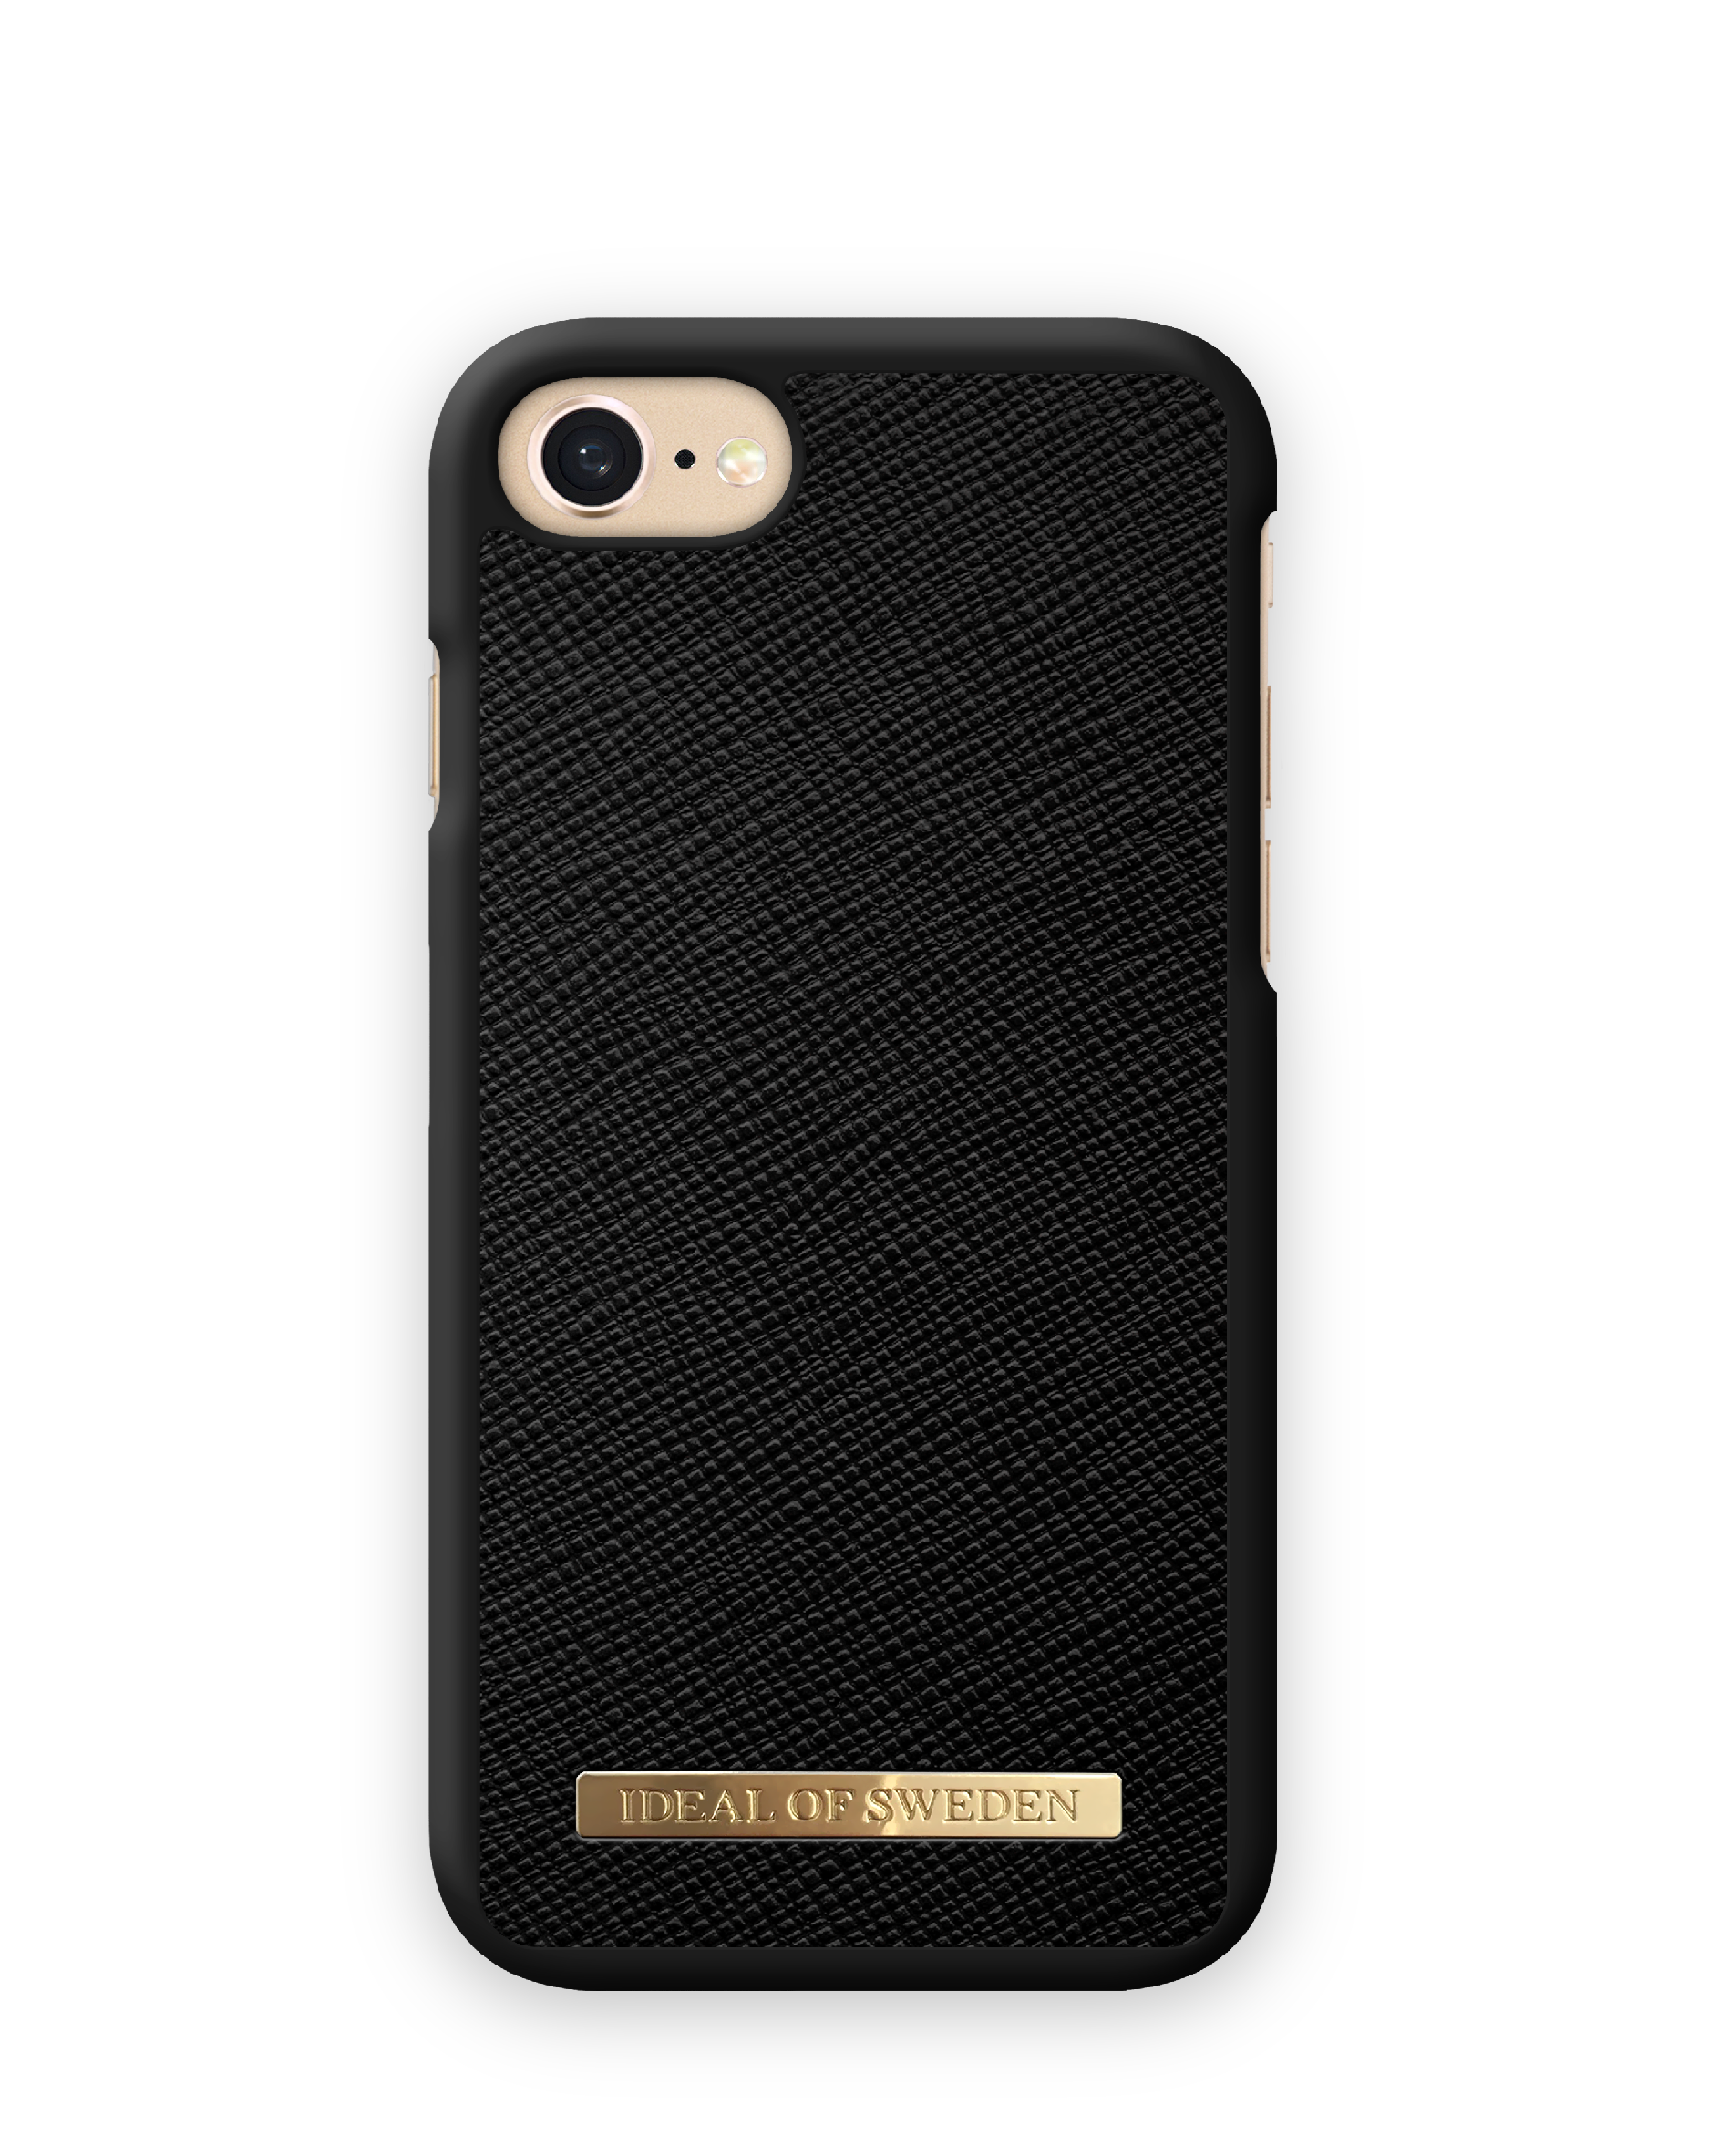 iPhone OF (2020), iPhone Apple, SWEDEN SE IDFCSA-I7-01, iPhone 6(S), 8, Apple Apple Backcover, Black Apple Apple IDEAL iPhone 7,